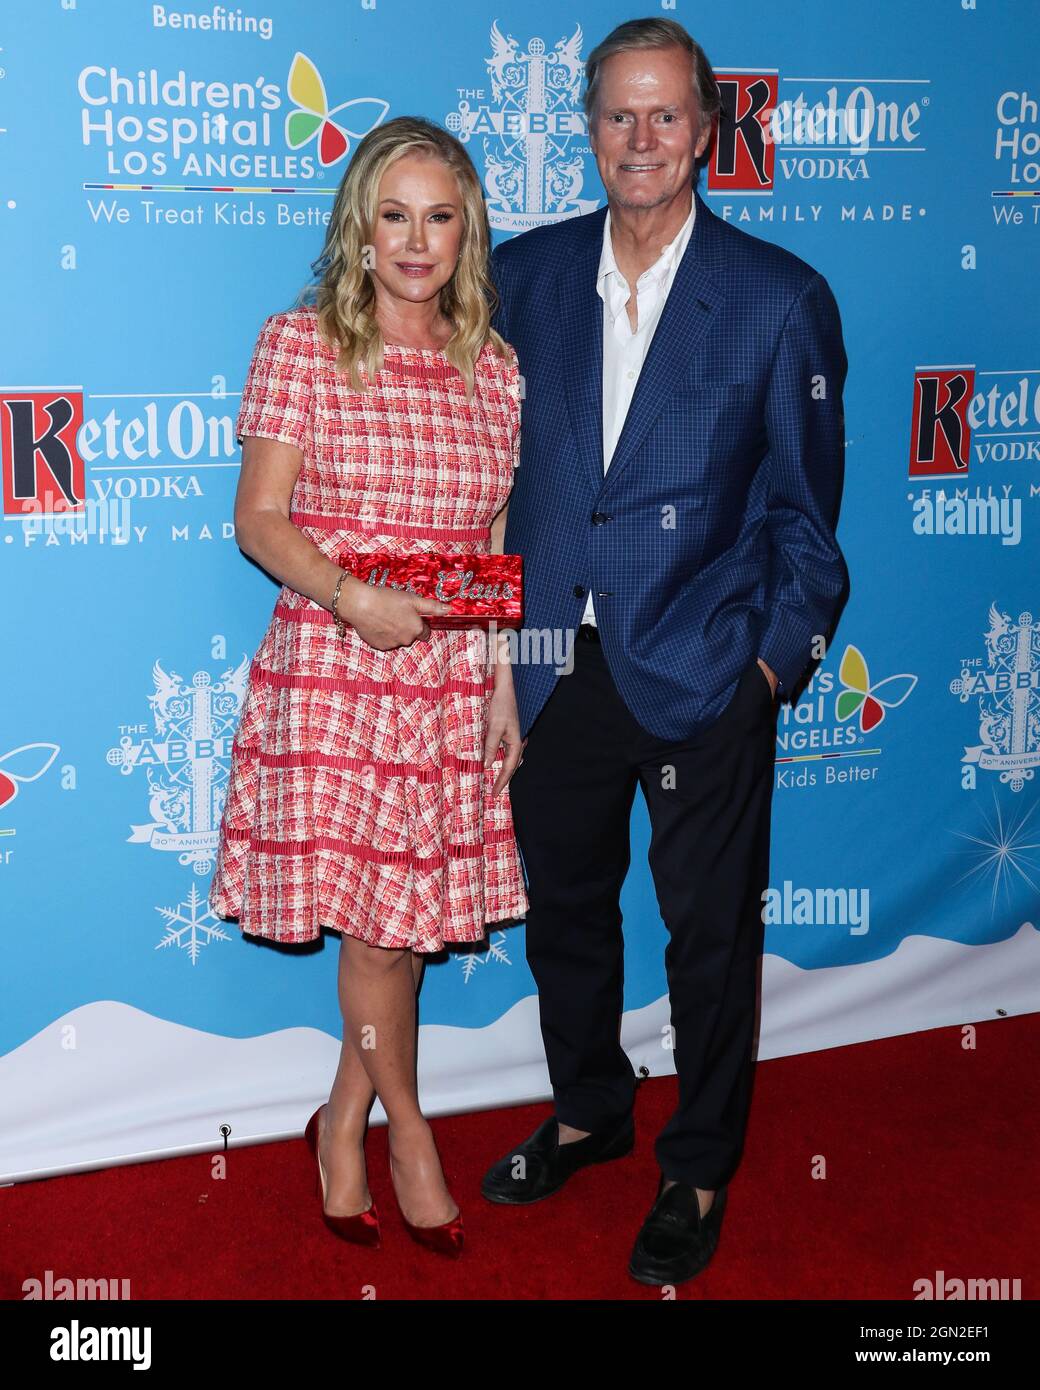 West Hollywood, United States. 21st Sep, 2021. WEST HOLLYWOOD, LOS ANGELES, CALIFORNIA, USA - SEPTEMBER 21: Actress Kathy Hilton and husband Richard Hilton arrive at the 16th Annual Toy Drive For Children's Hospital Los Angeles Hosted By Kathy Hilton, Paris Hilton And Nicky Hilton Rothschild held at The Abbey Food and Bar on September 21, 2021 in West Hollywood, Los Angeles, California, United States. (Photo by Xavier Collin/Image Press Agency) Credit: Image Press Agency/Alamy Live News Stock Photo